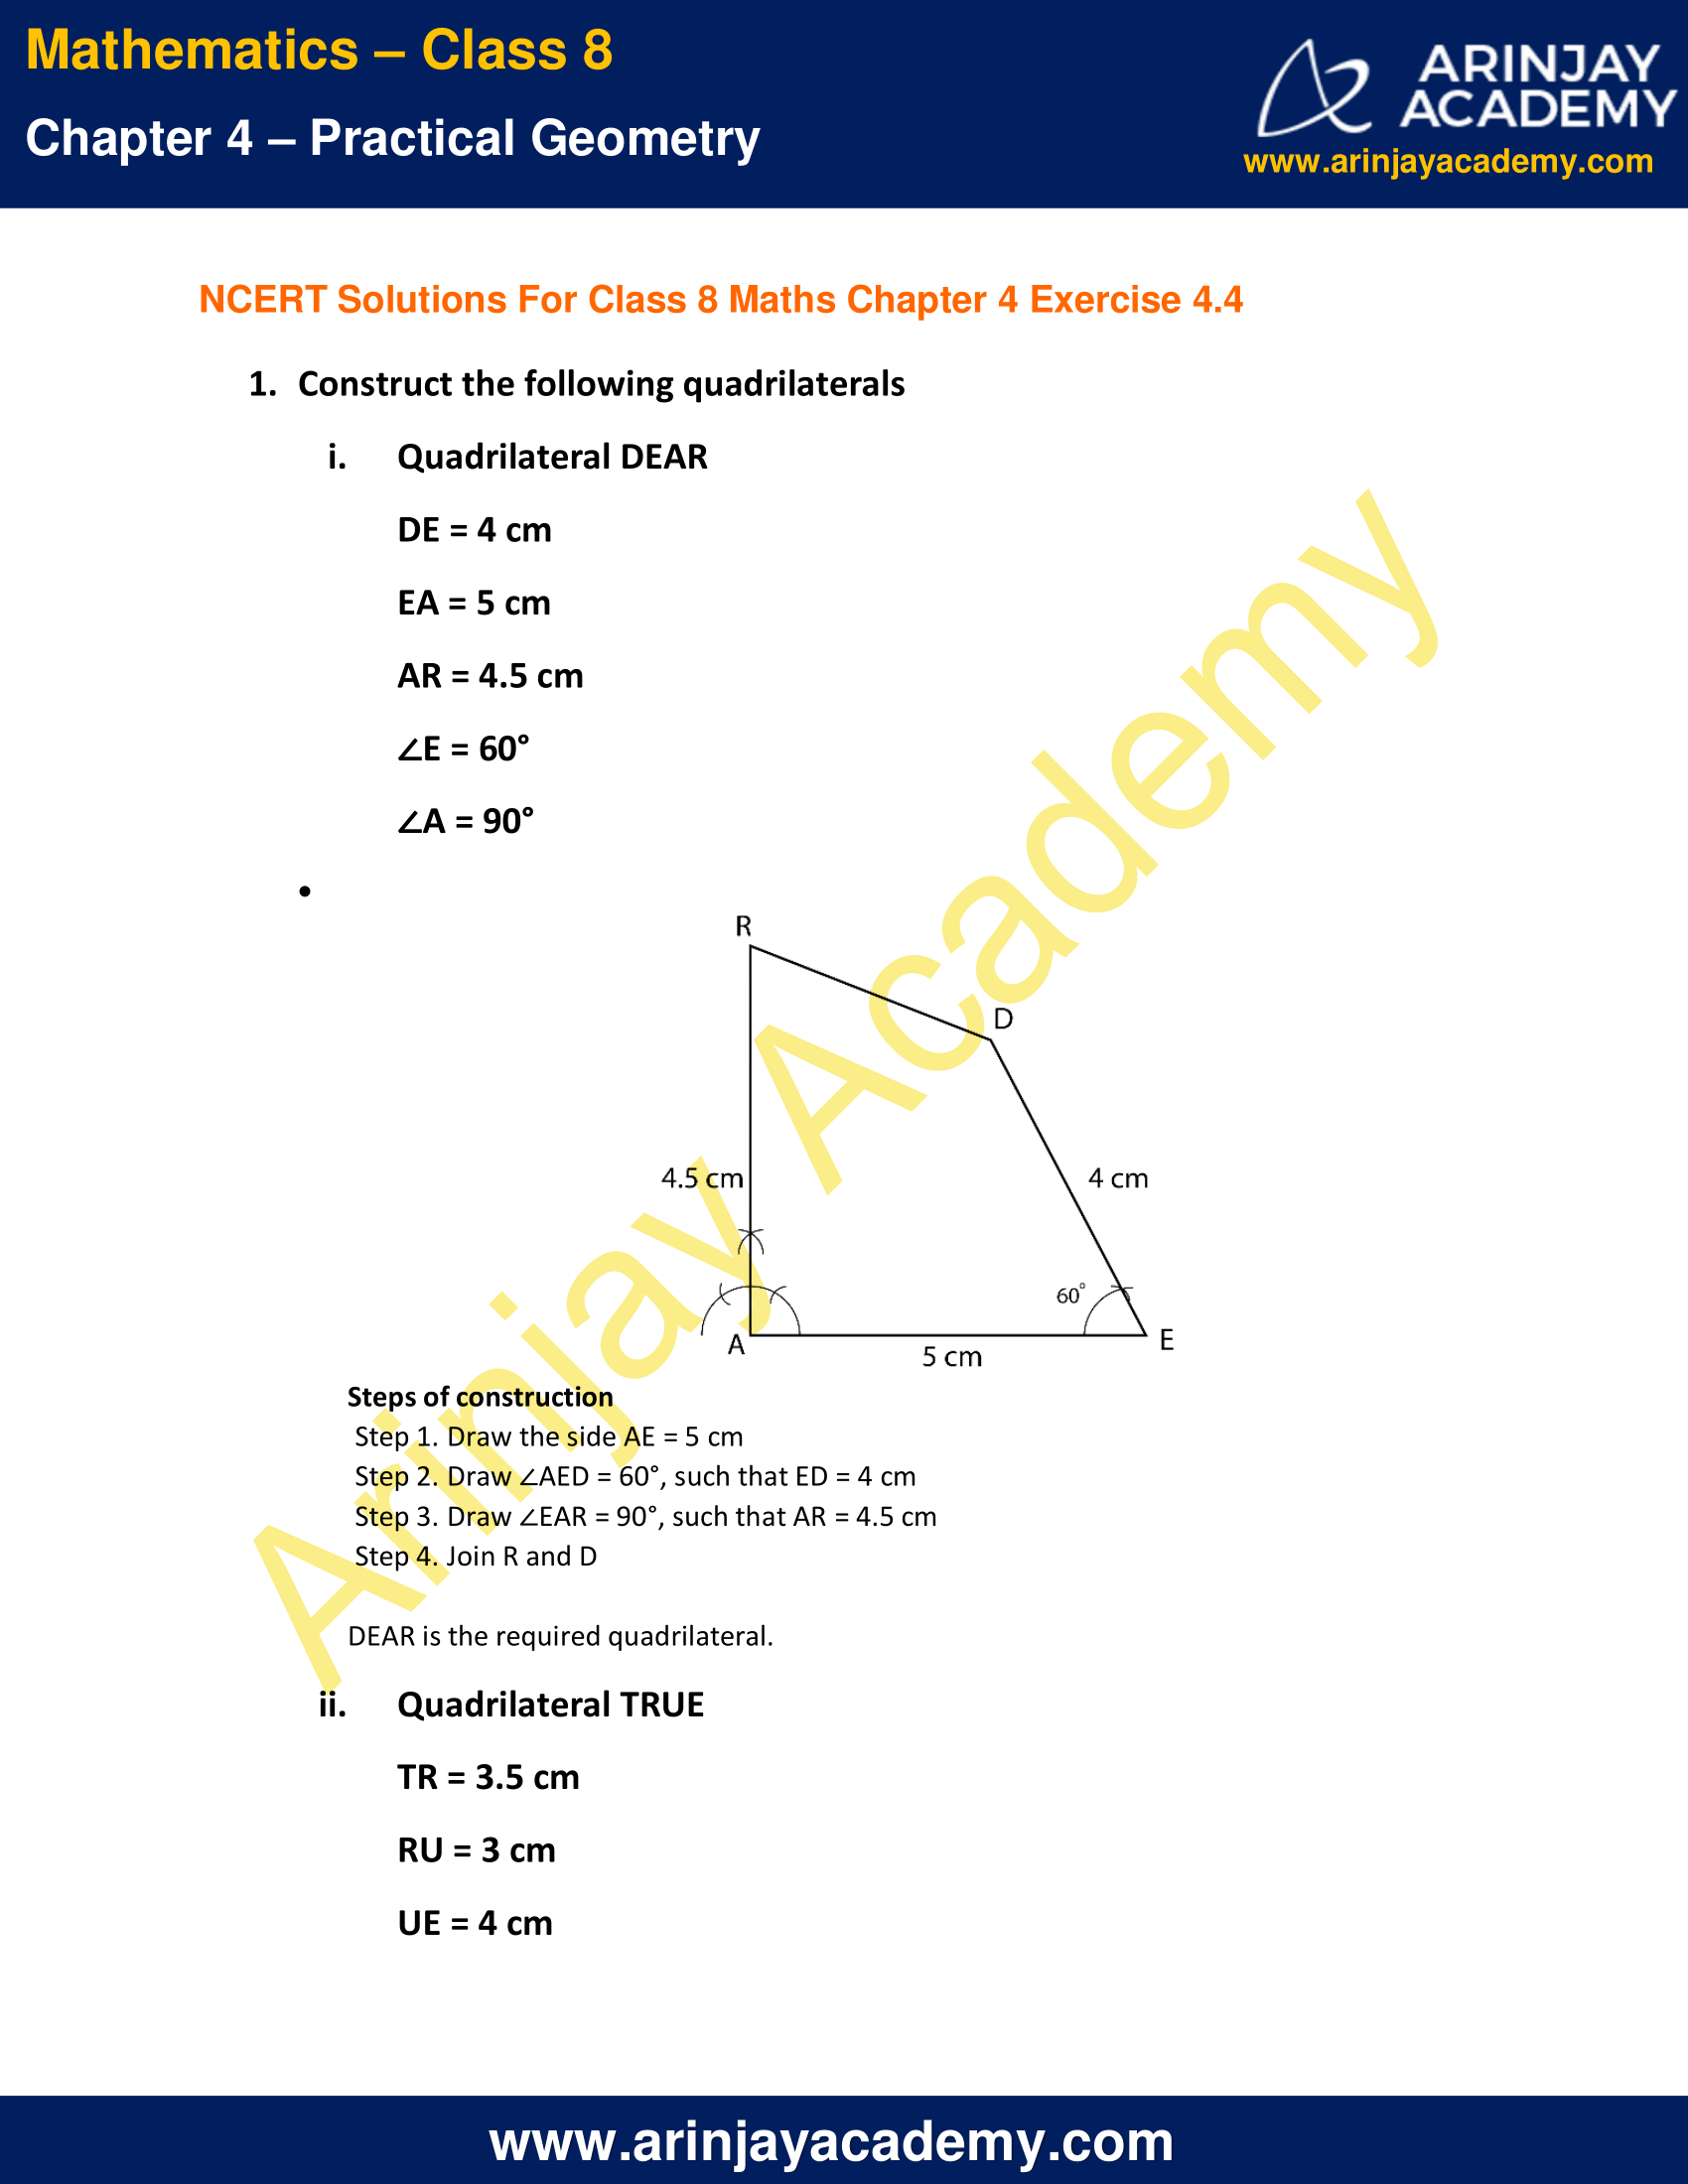 NCERT Solutions for Class 8 Maths Chapter 4 Exercise 4.4 image 1